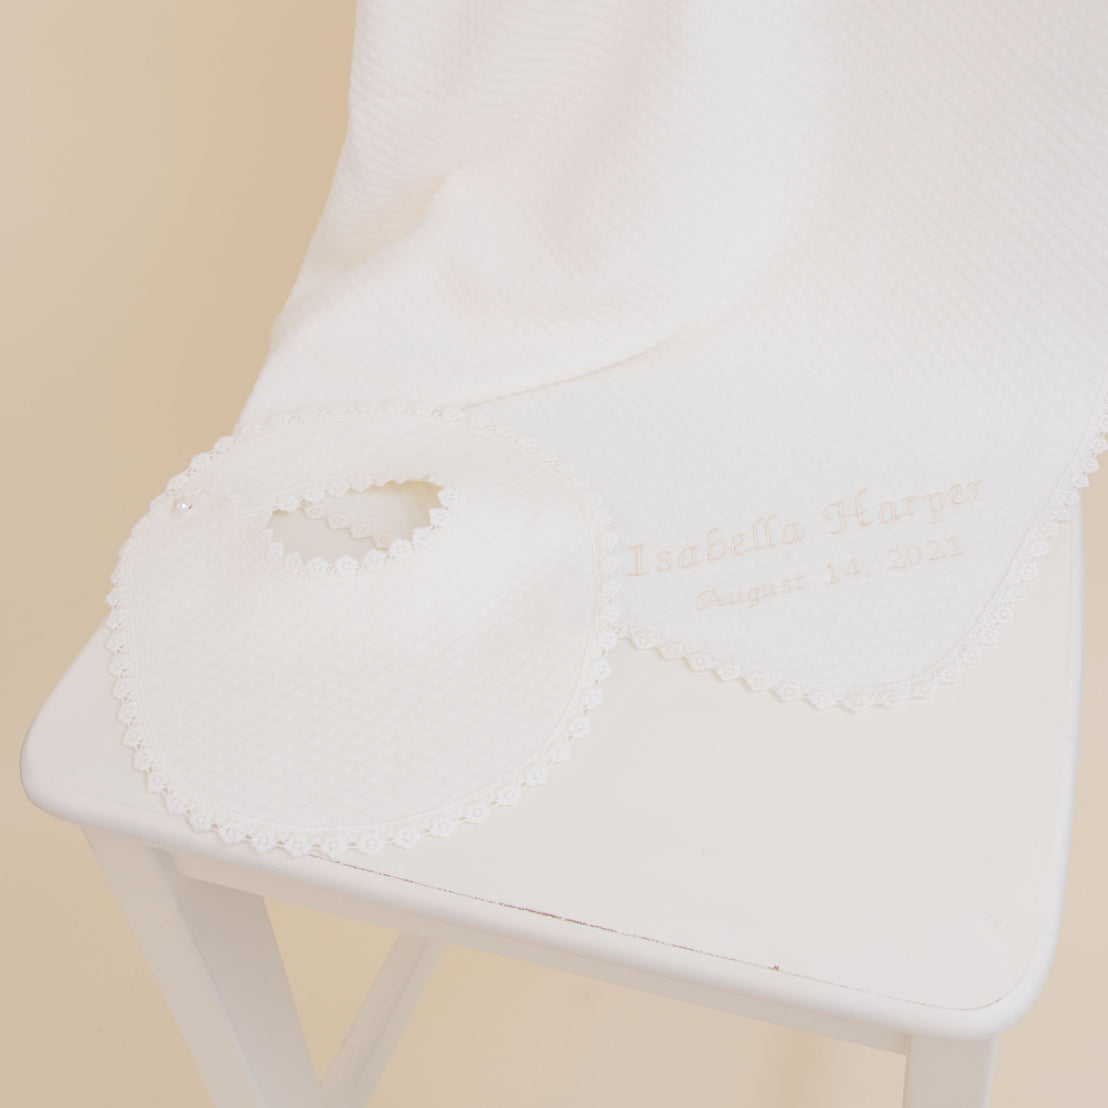 A white Baby Beau & Belle baby blanket and bib personalized with the name "Isabella Harper" and the date "August 14, 2021," laid on a white chair with a beige background. The cotton bib